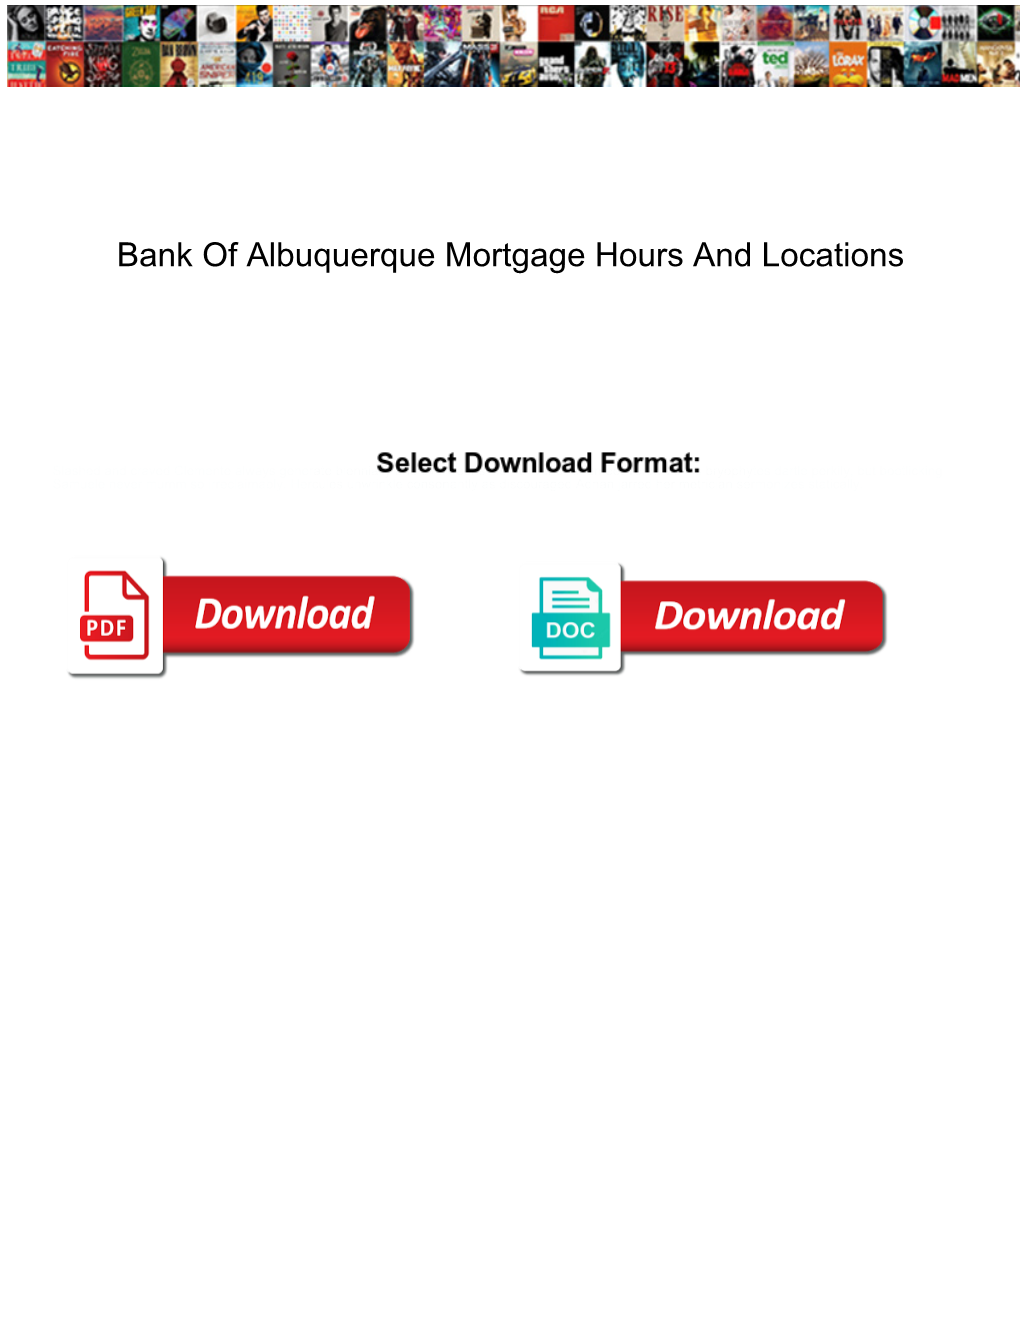 Bank of Albuquerque Mortgage Hours and Locations